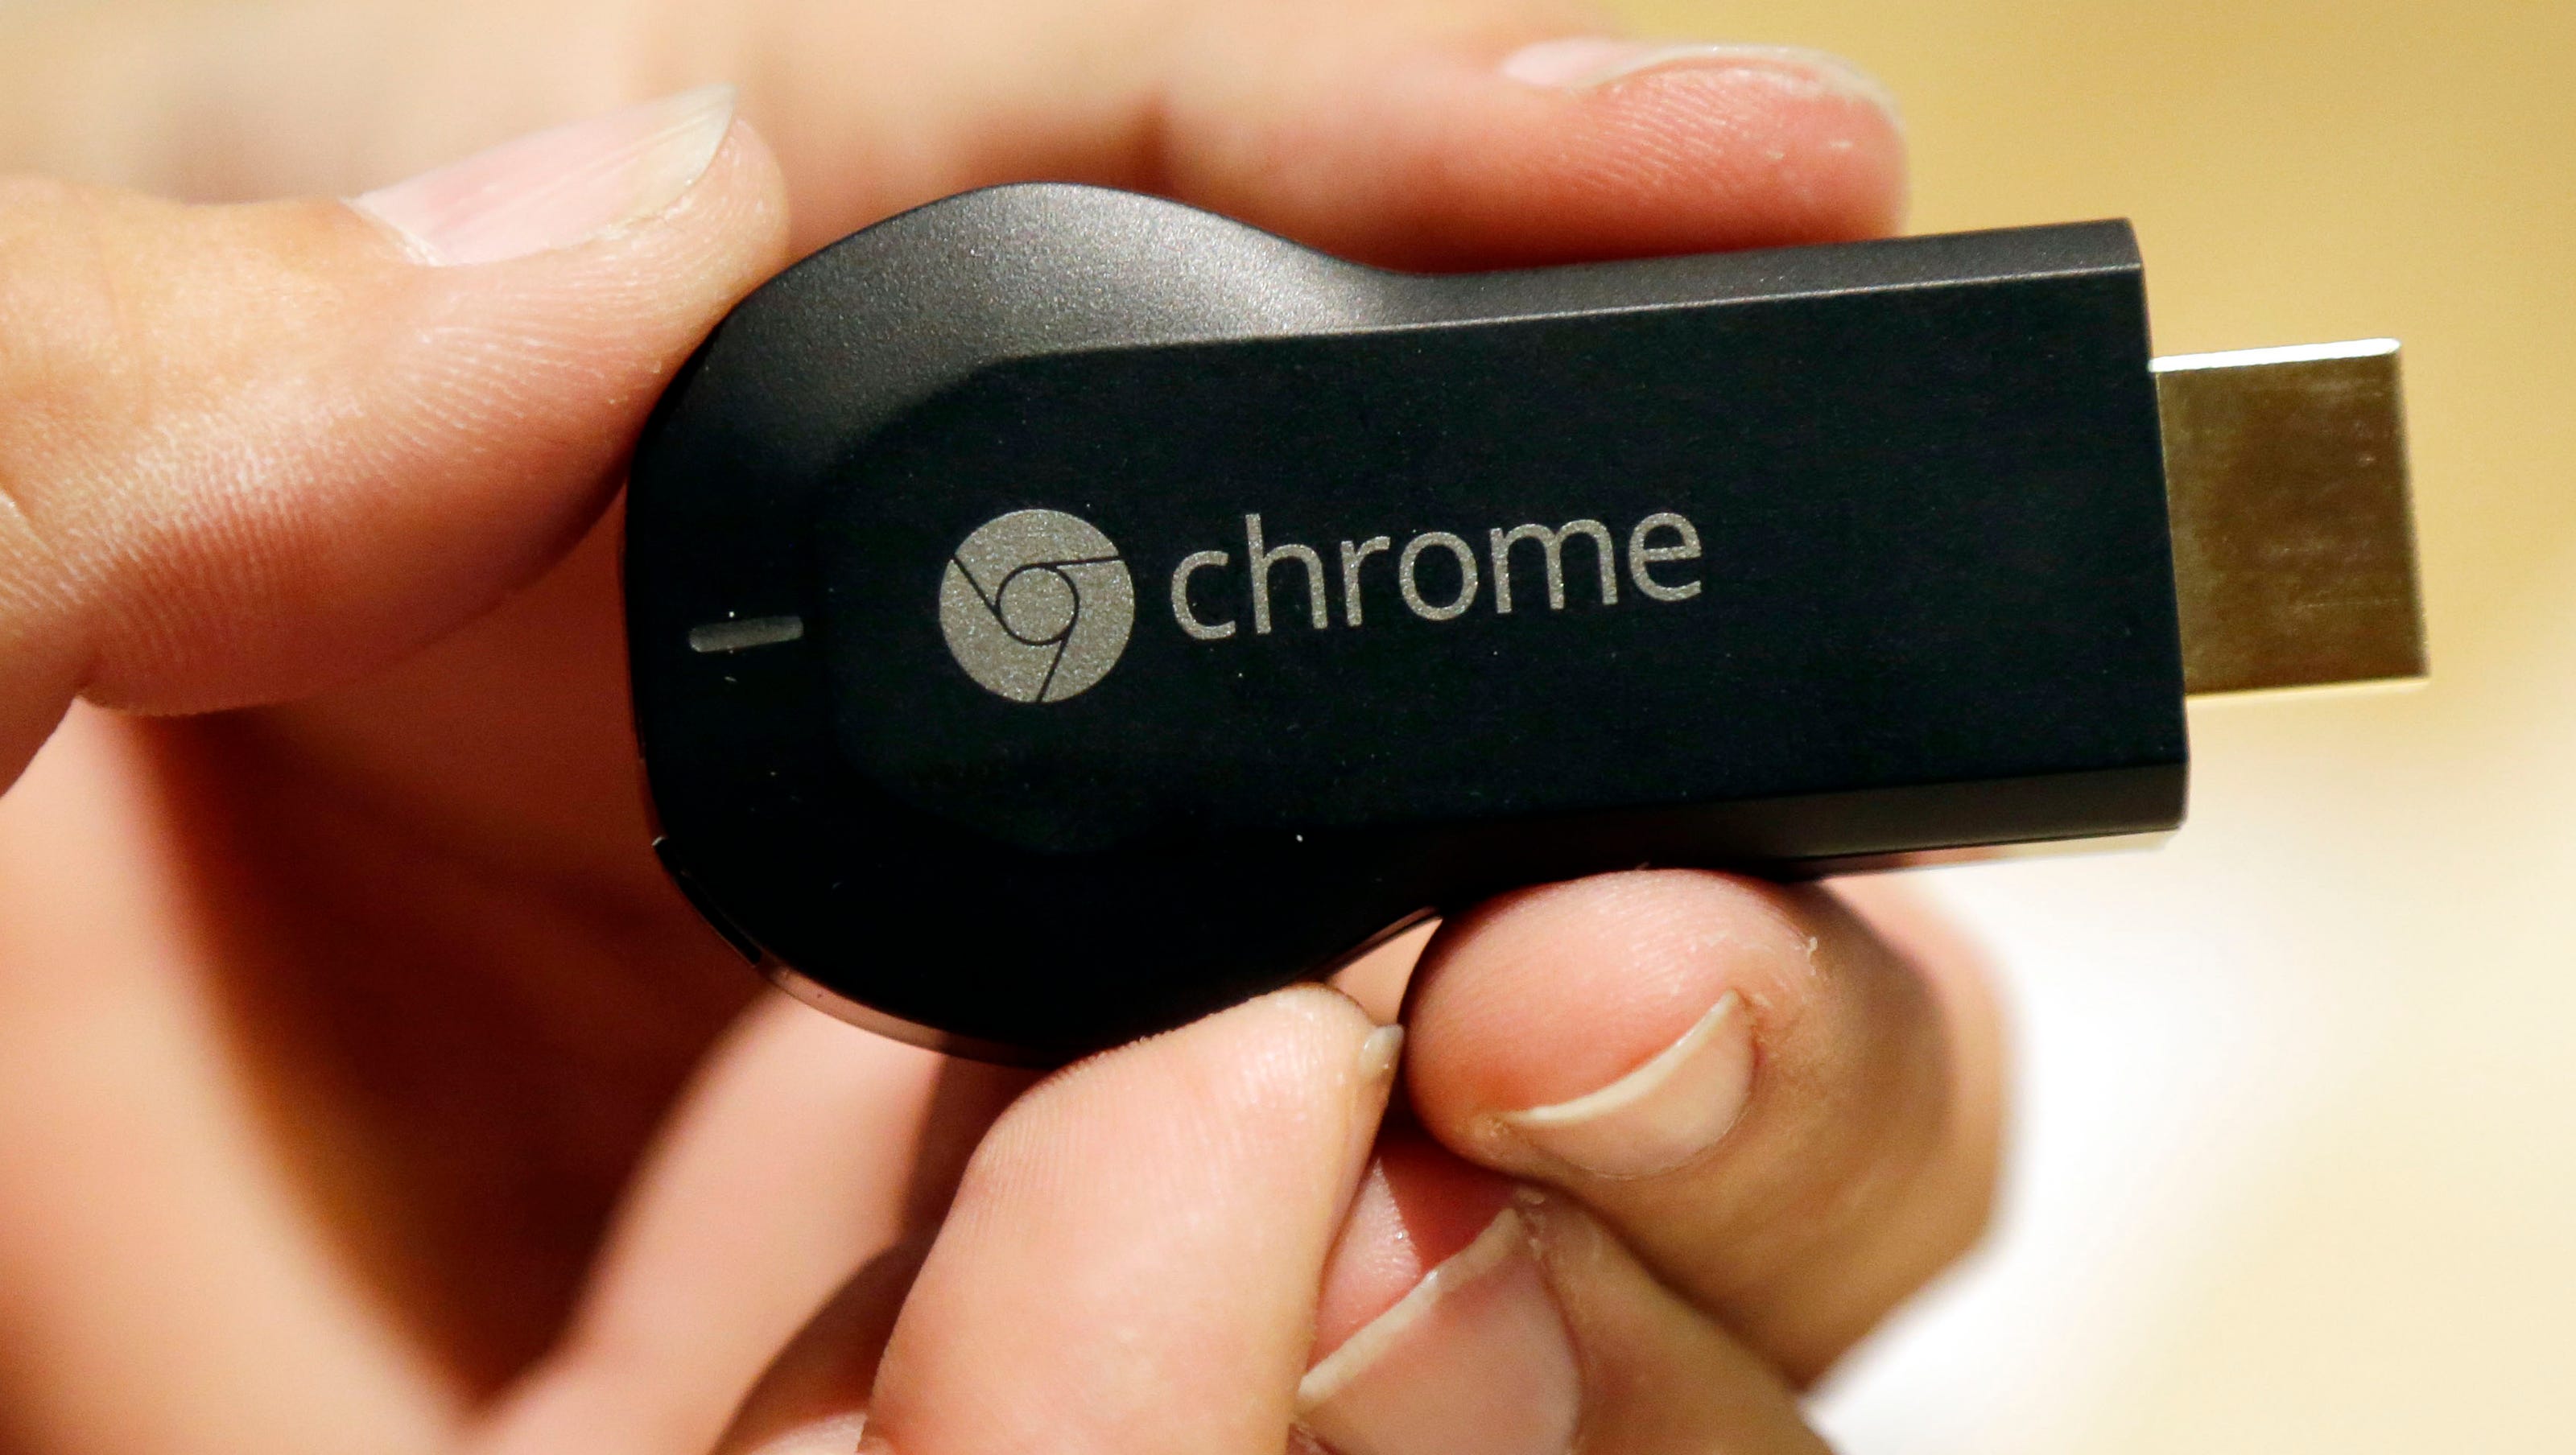 nordøst magnet kalk How to watch your own videos on Chromecast